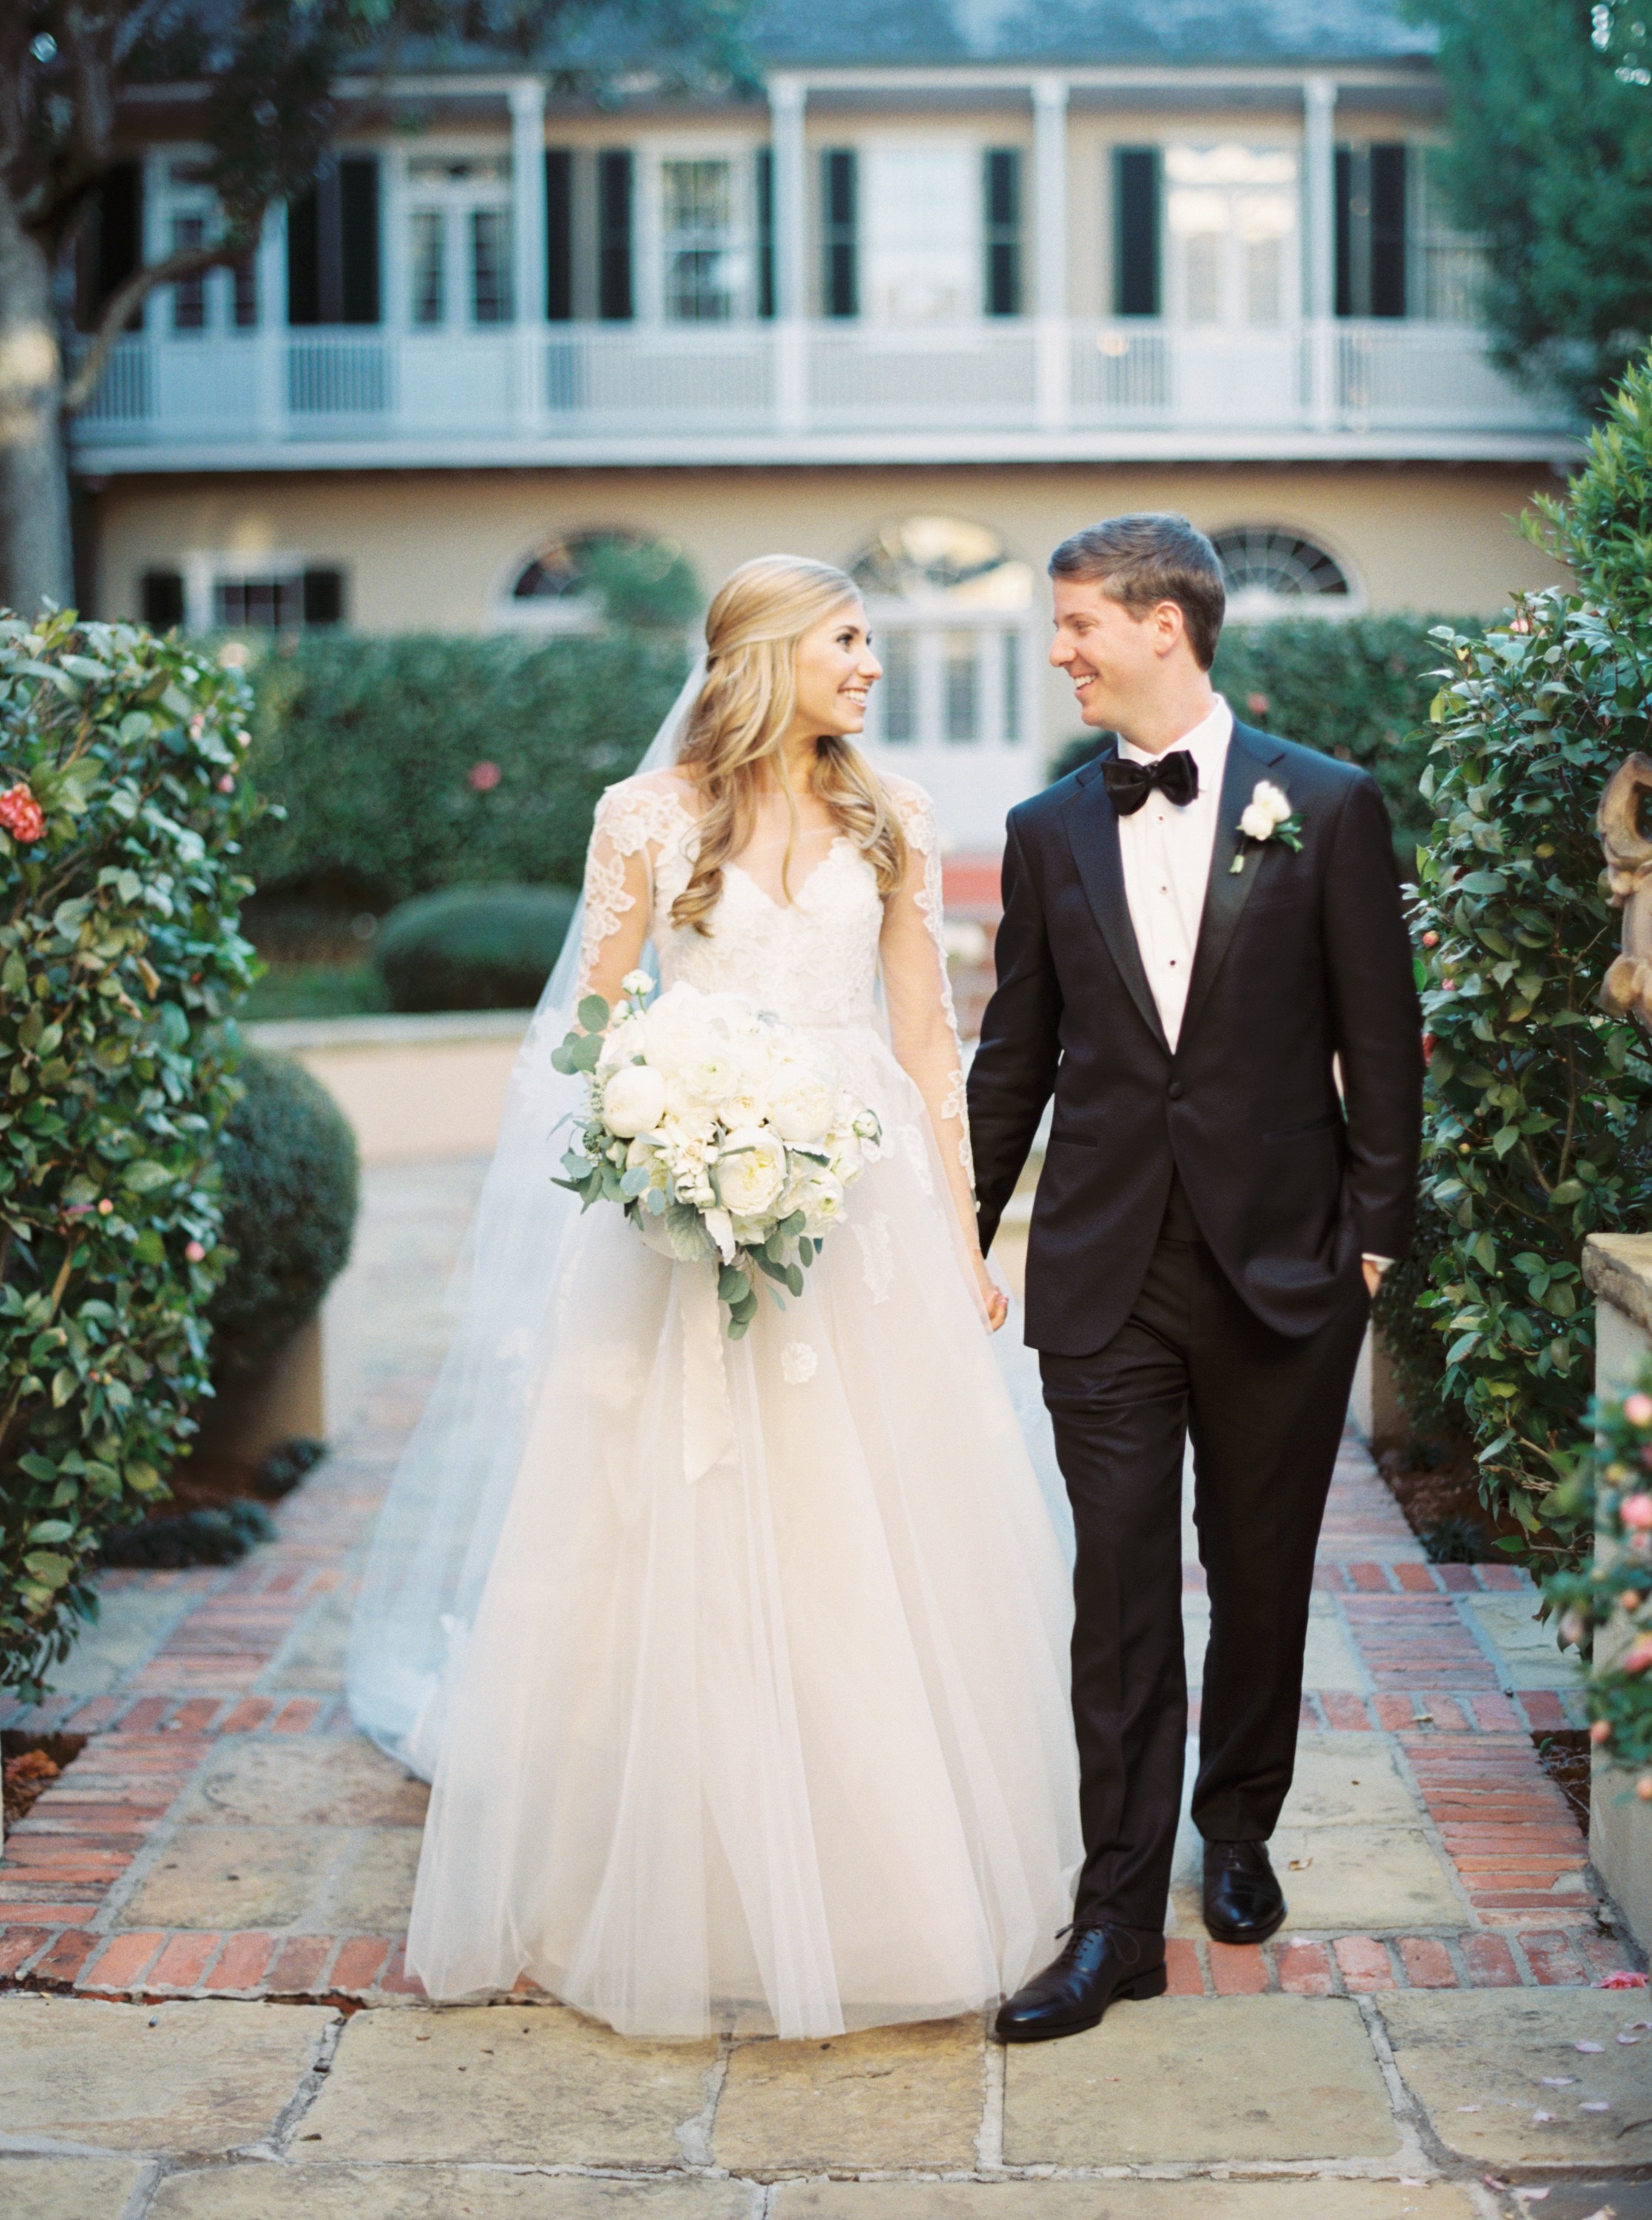 A Romantic Winter Wedding in New Orleans | Brides